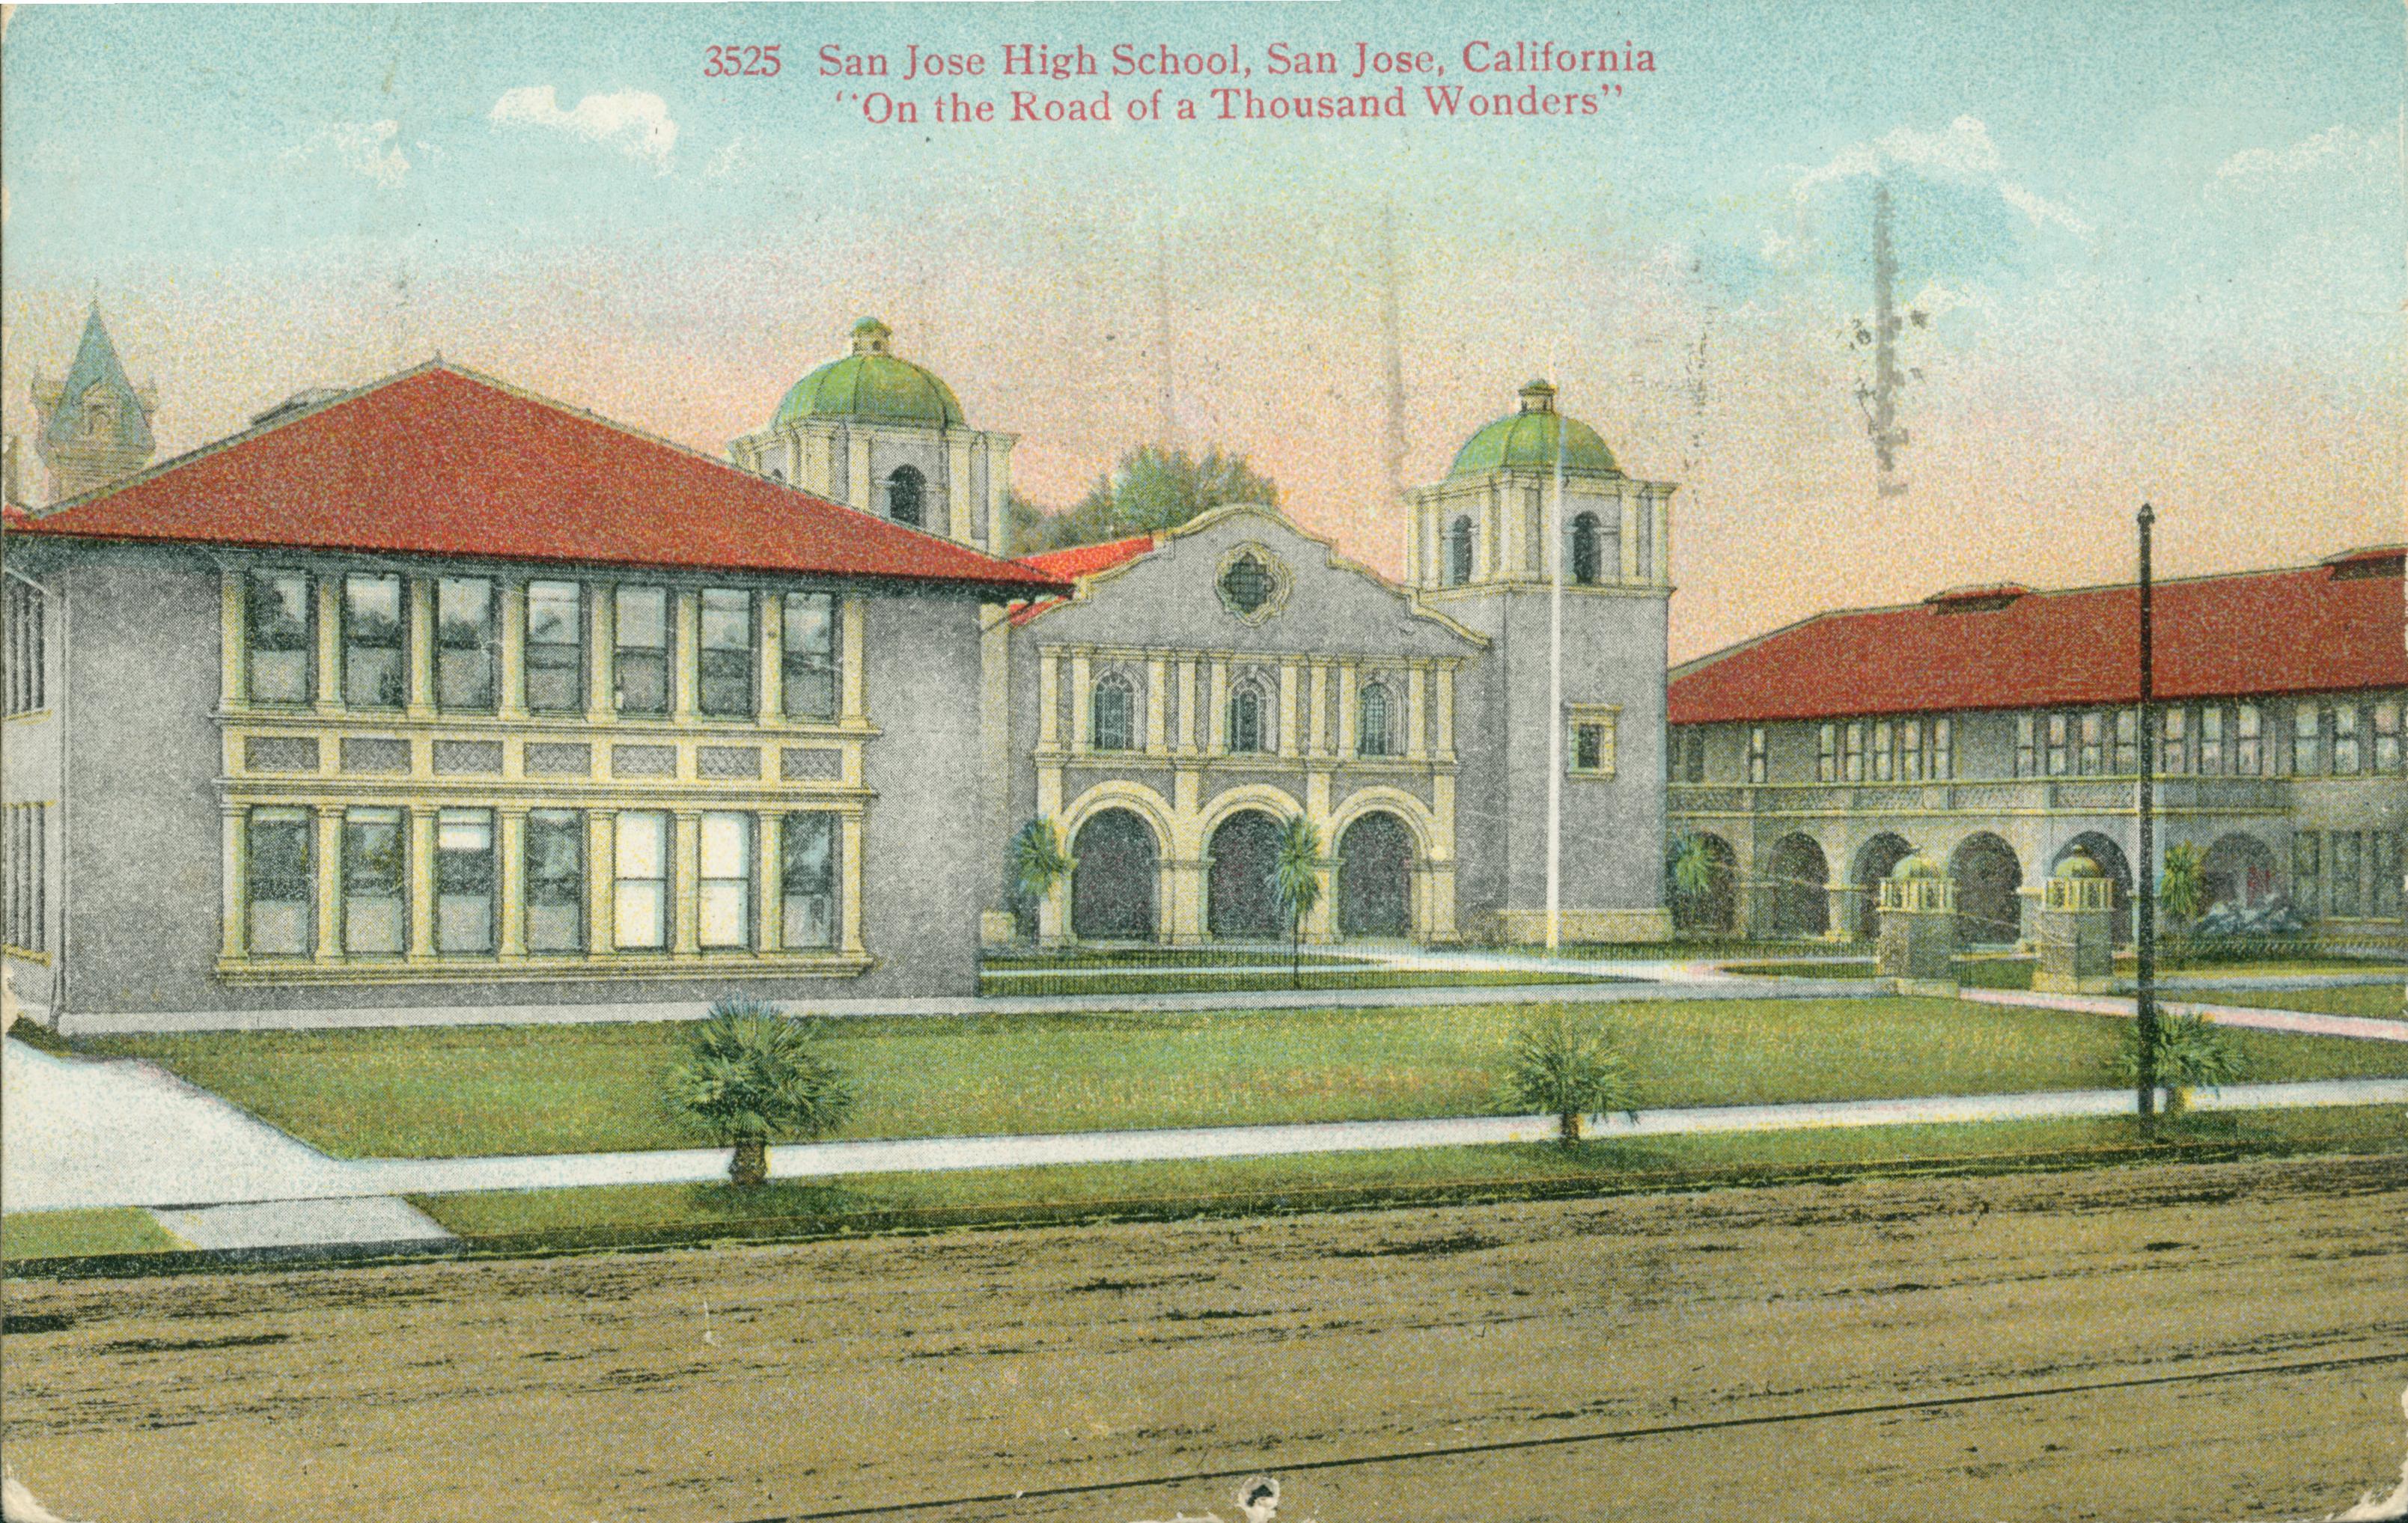 Shows the exterior of the High School